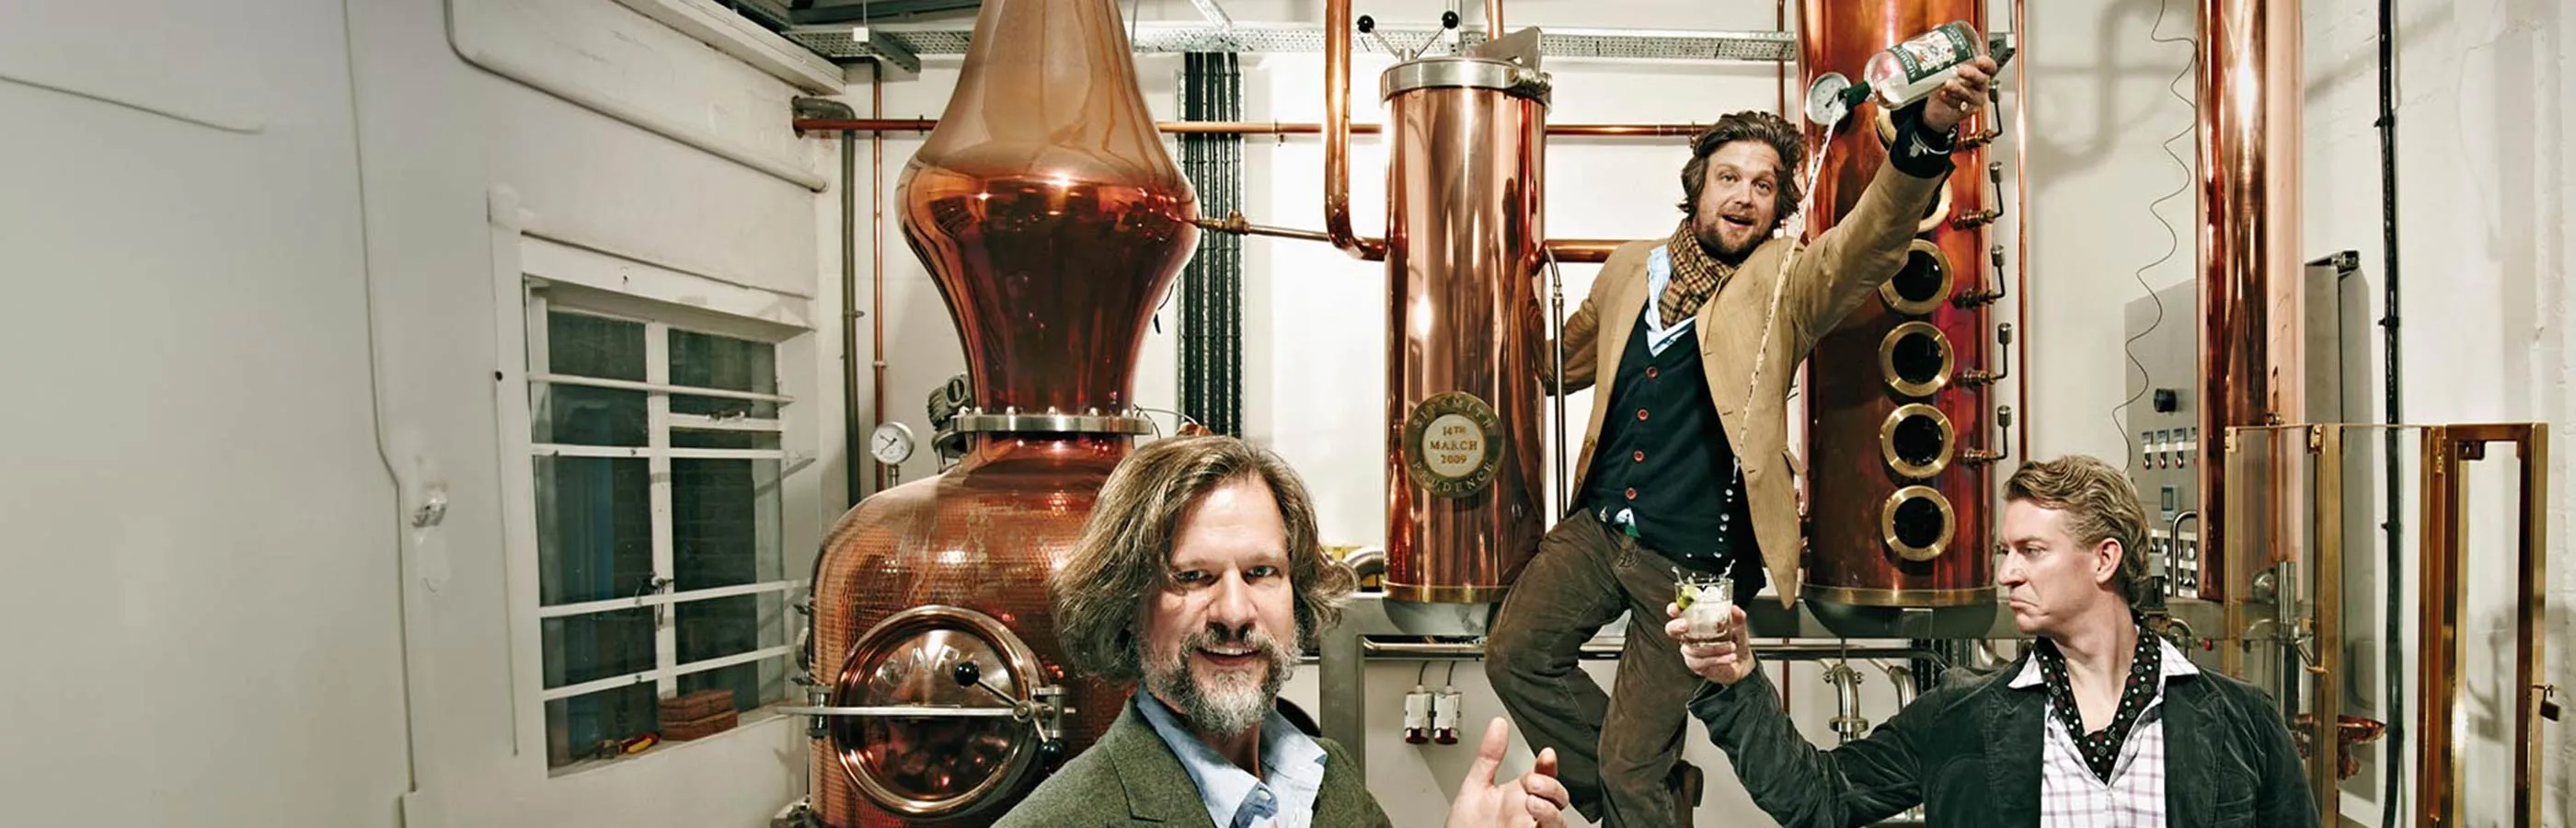 sipsmith and beam suntory join forces to deliver global growth in the super premium gin category